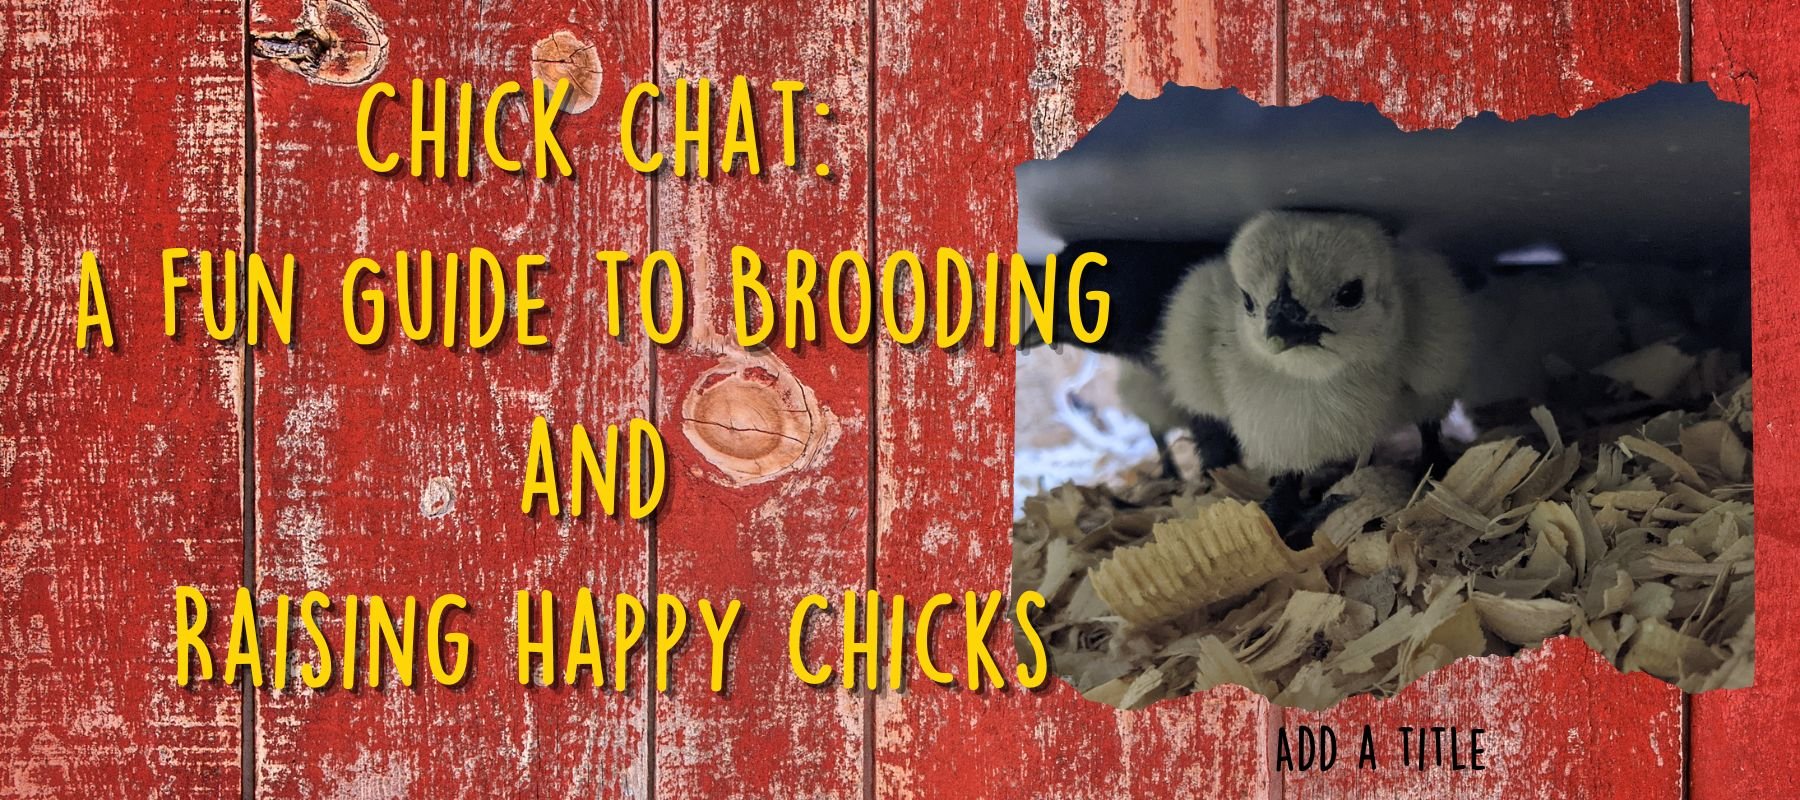 Chick Chat: A Fun Guide to Brooding and Raising Happy Chicks - Cluck It All Farms